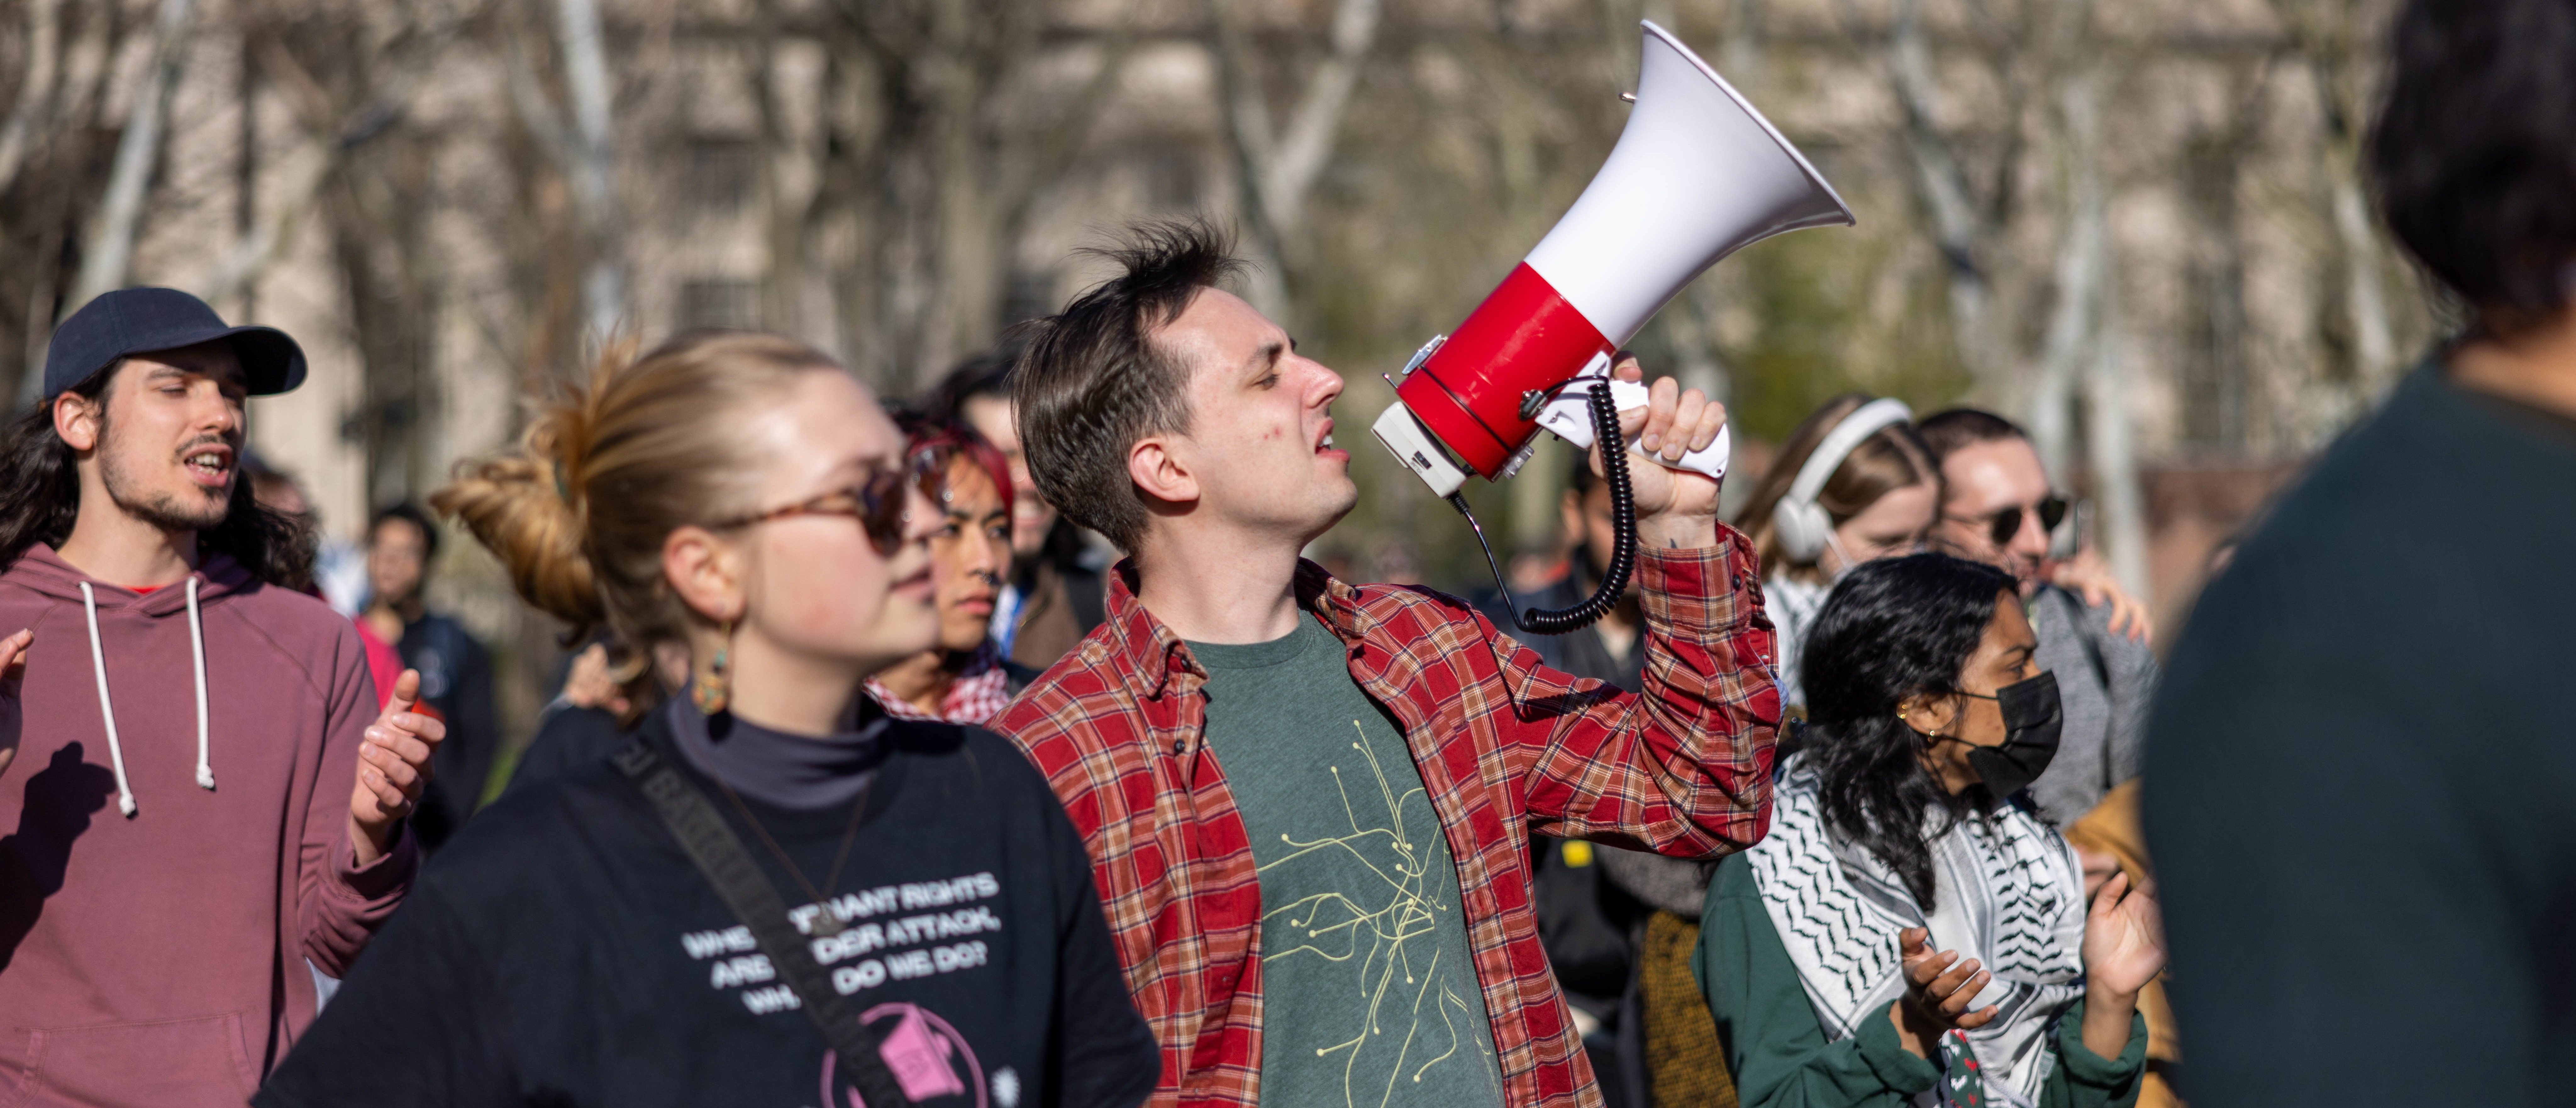 Students from Massachusetts of Technology, Harvard University and others rally at a protest encampment by The Scientists Against Genocide on Massachusetts Institute of Technology's Kresge Lawn on April 22, 2024 in Cambridge, Massachusetts. (Eisen/Getty Images)